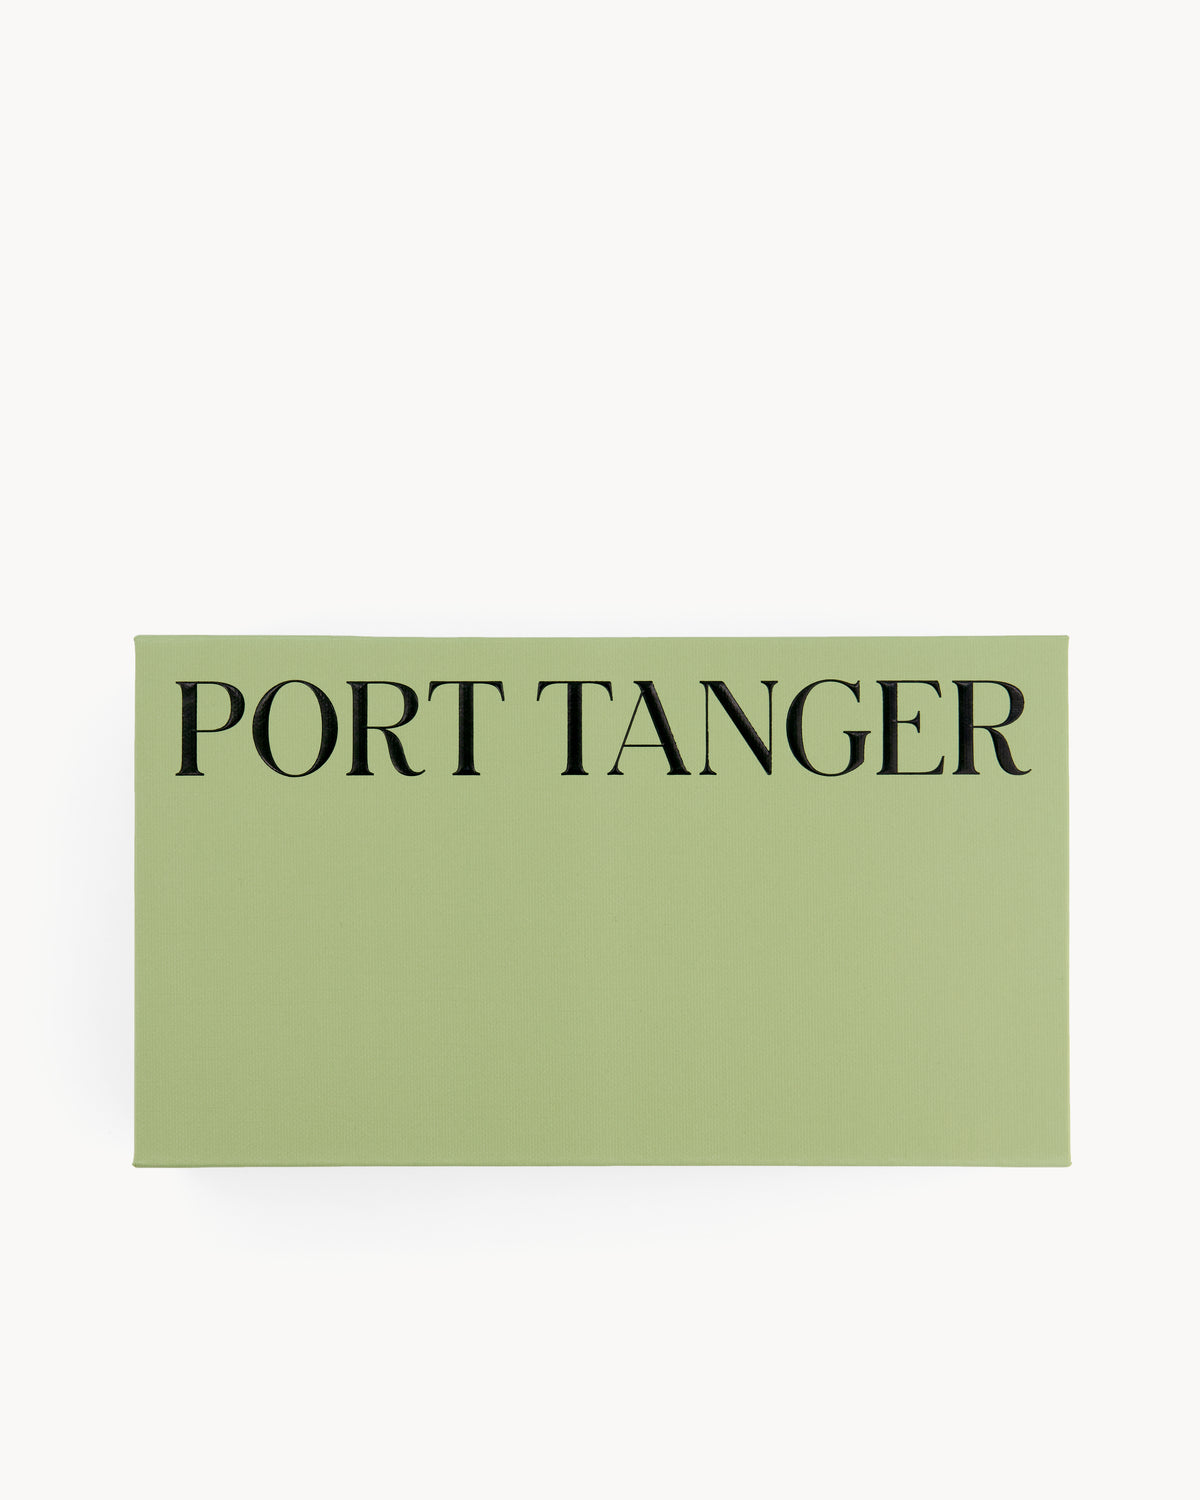 Port Tanger Andalucia Sunglasses in Black Acetate and Warm Olive Lenses 5